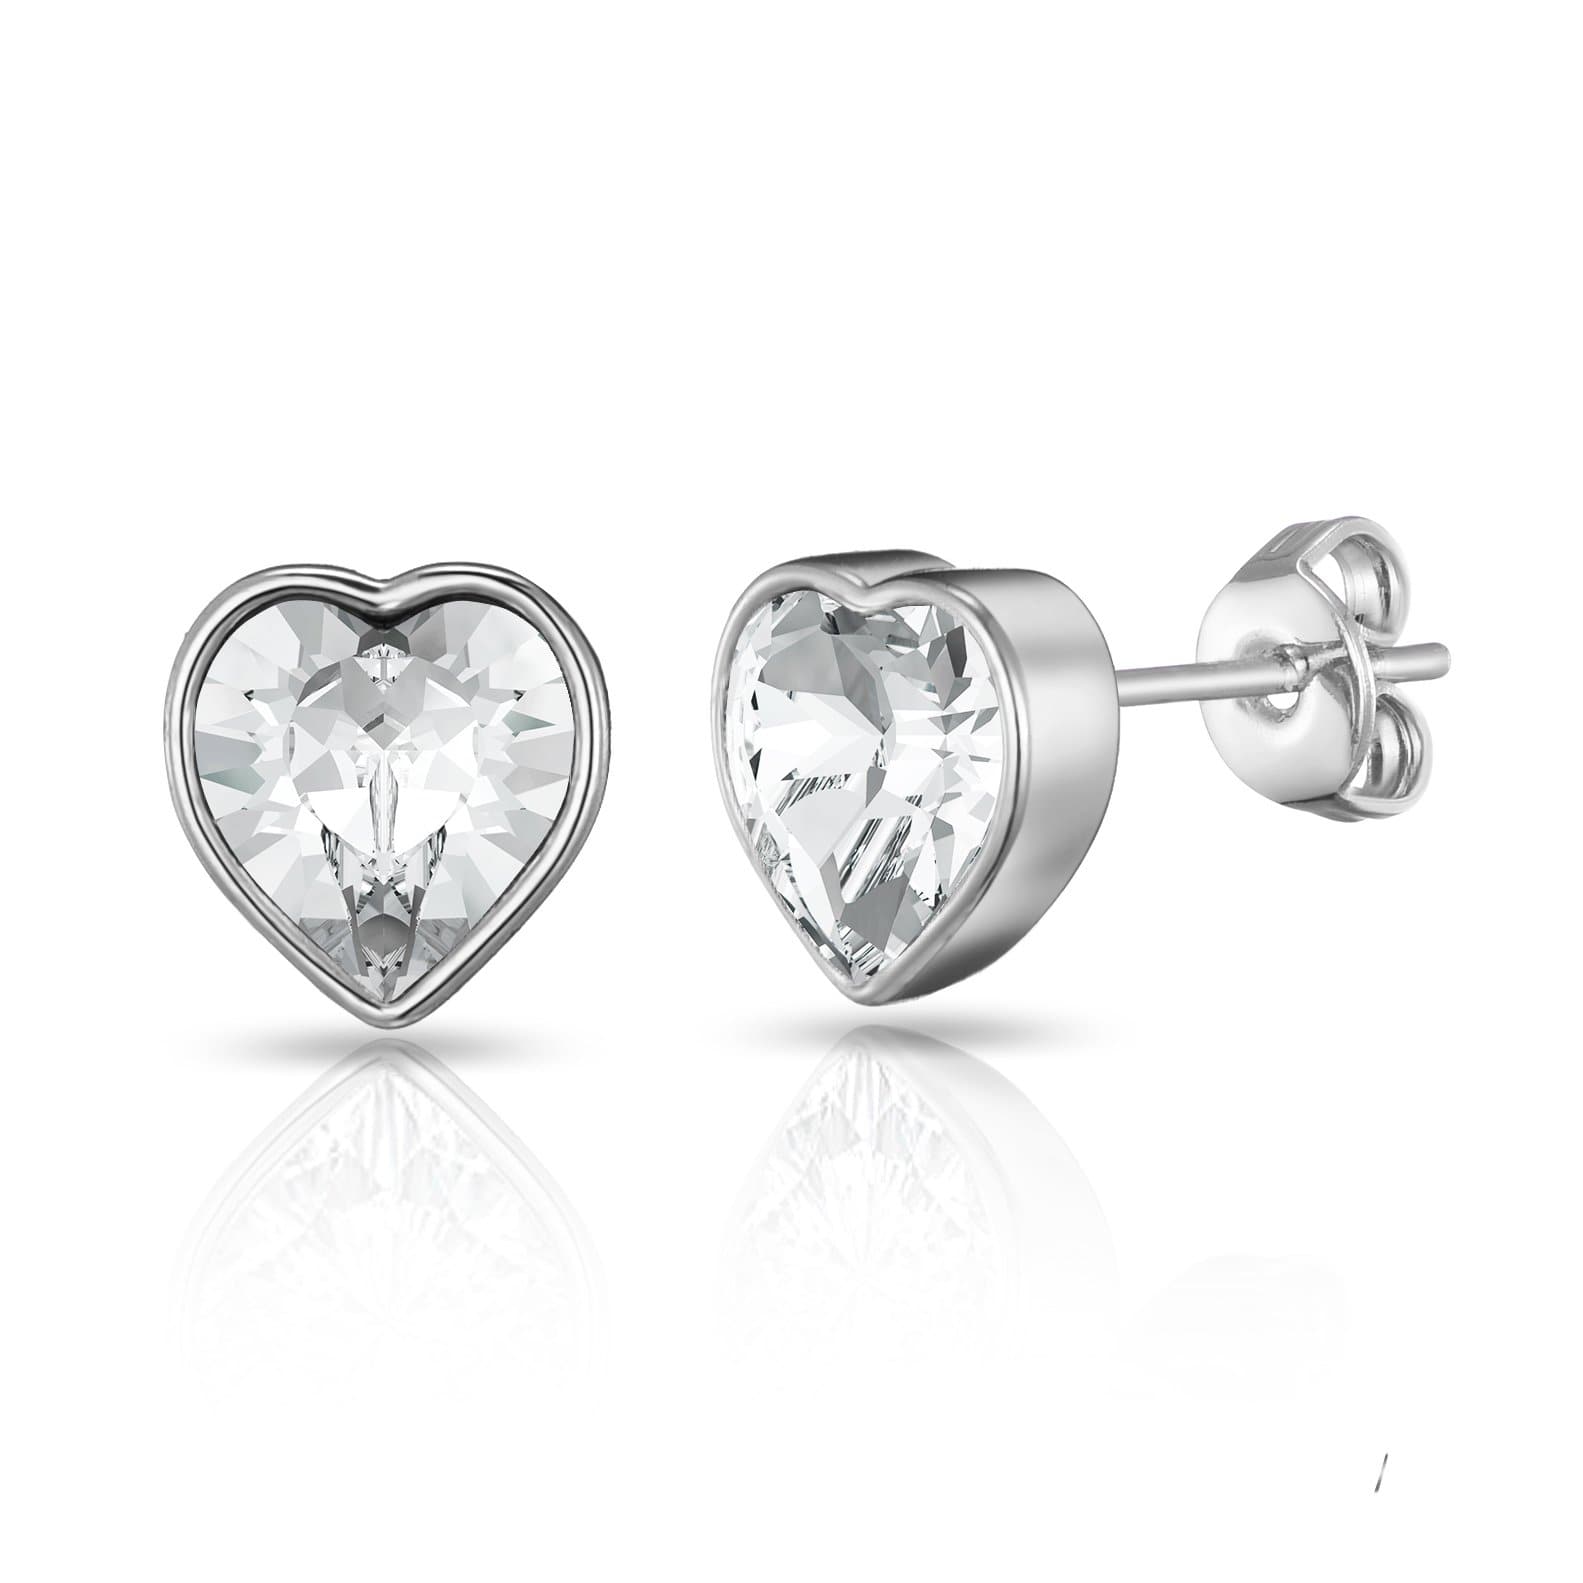 Silver Plated Bezel set Heart Earrings Created with Zircondia® Crystals by Philip Jones Jewellery